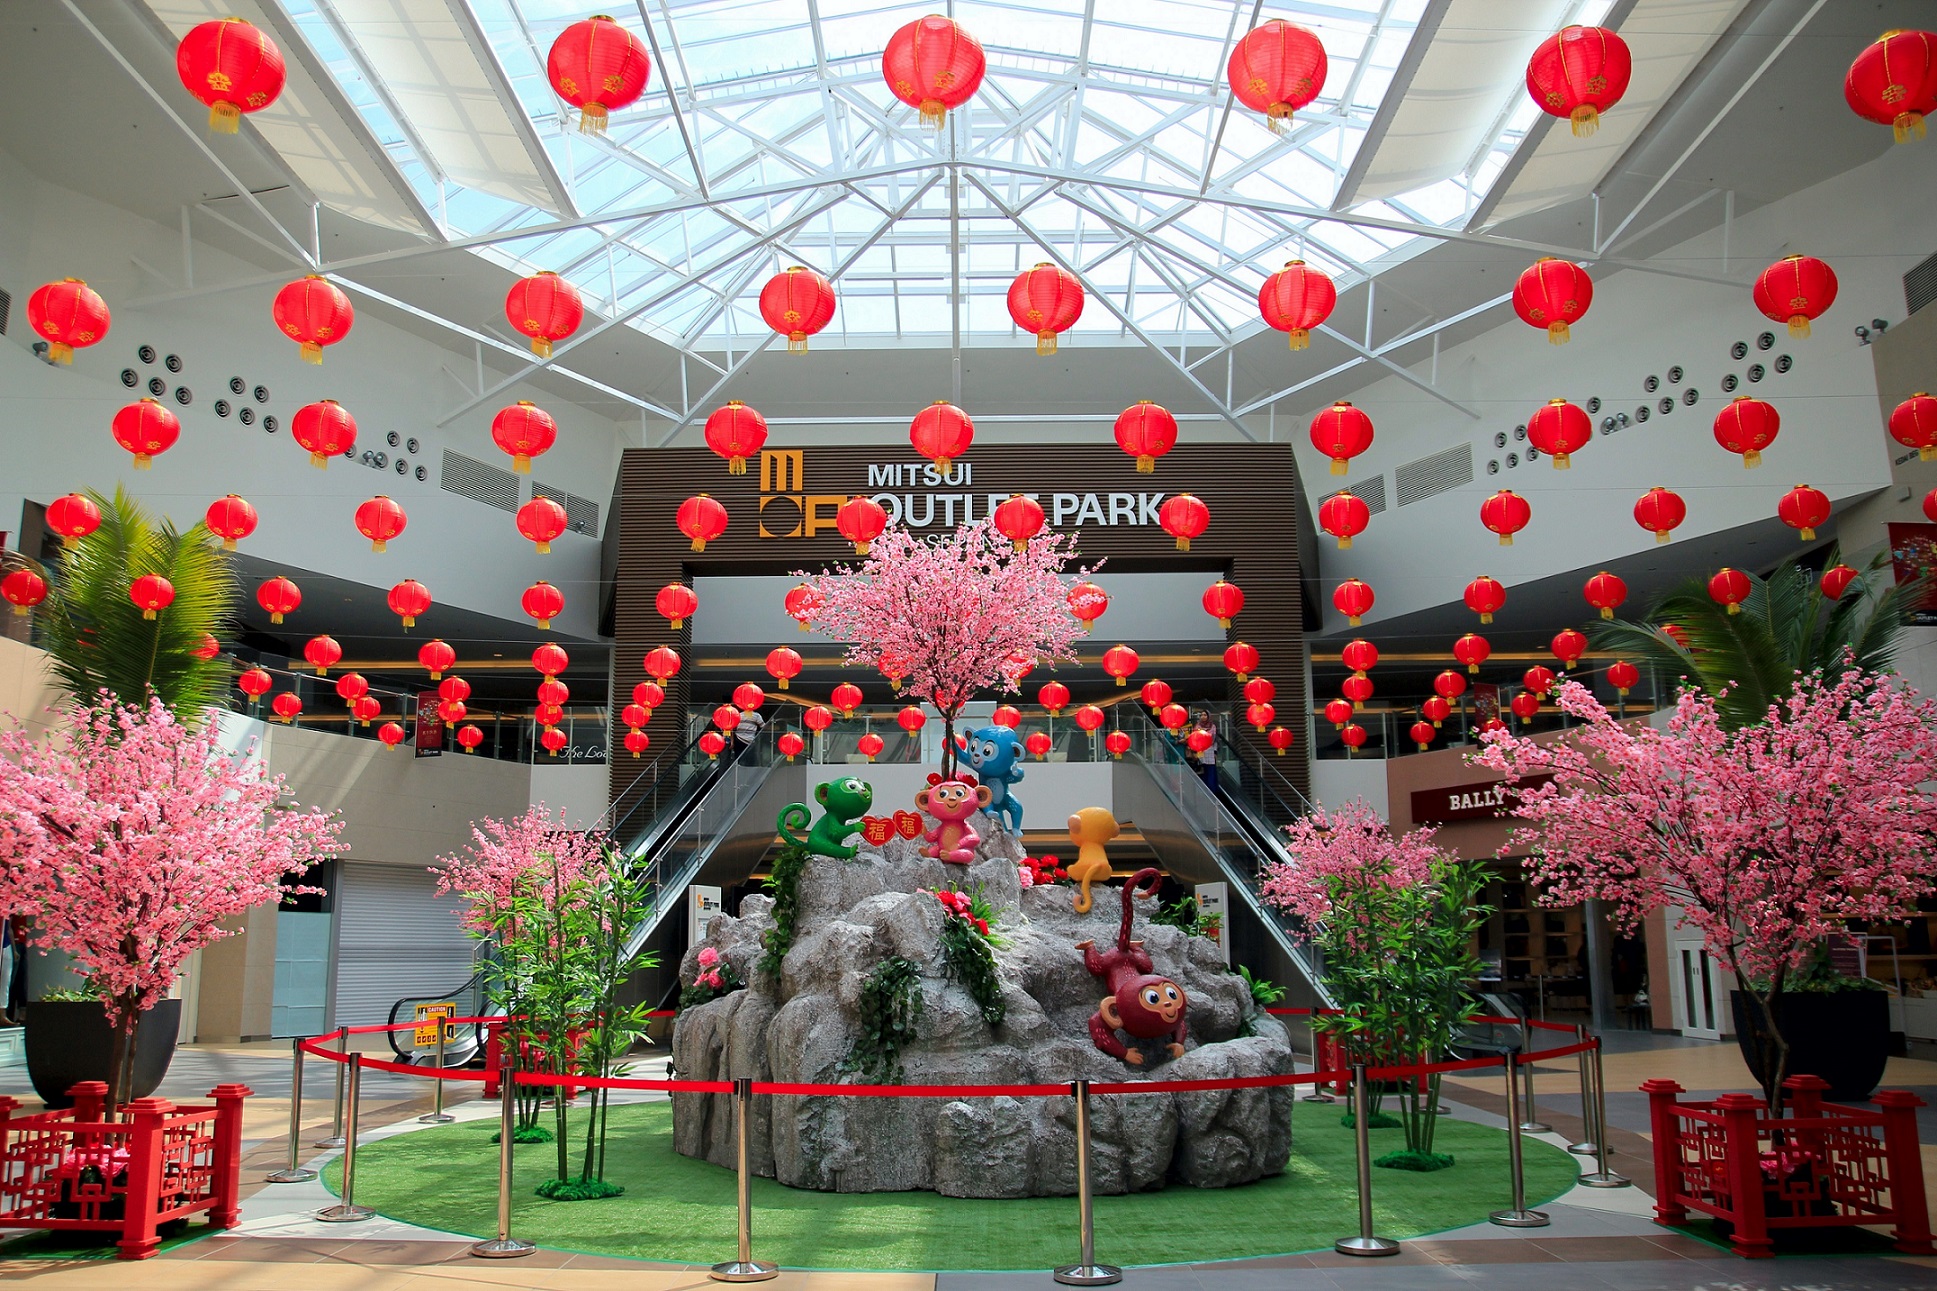 Mitsui Outlet Park KLIA Sepang welcomes the Chinese New Year with festive decorations celebrating the Year of the Monkey